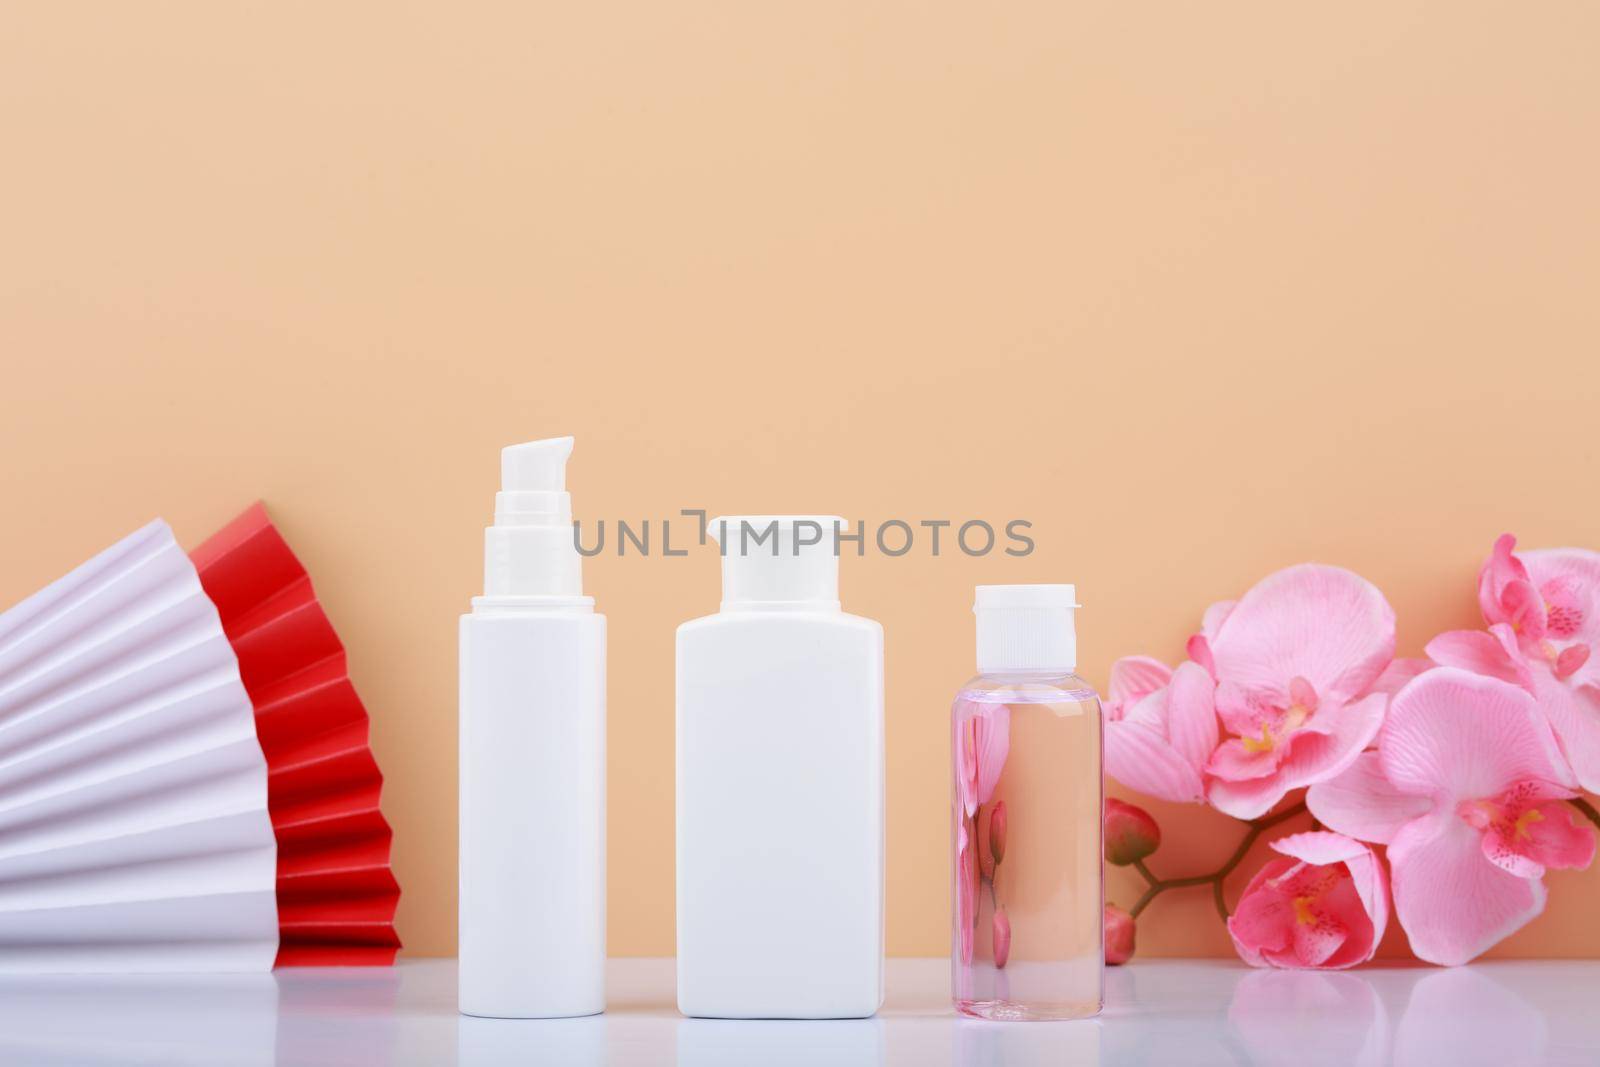 Face cream, cleaning foam and moisturizing or exfoliating lotion against beige background with wavers and flowers. Concept of organic skin care products and daily skin routine